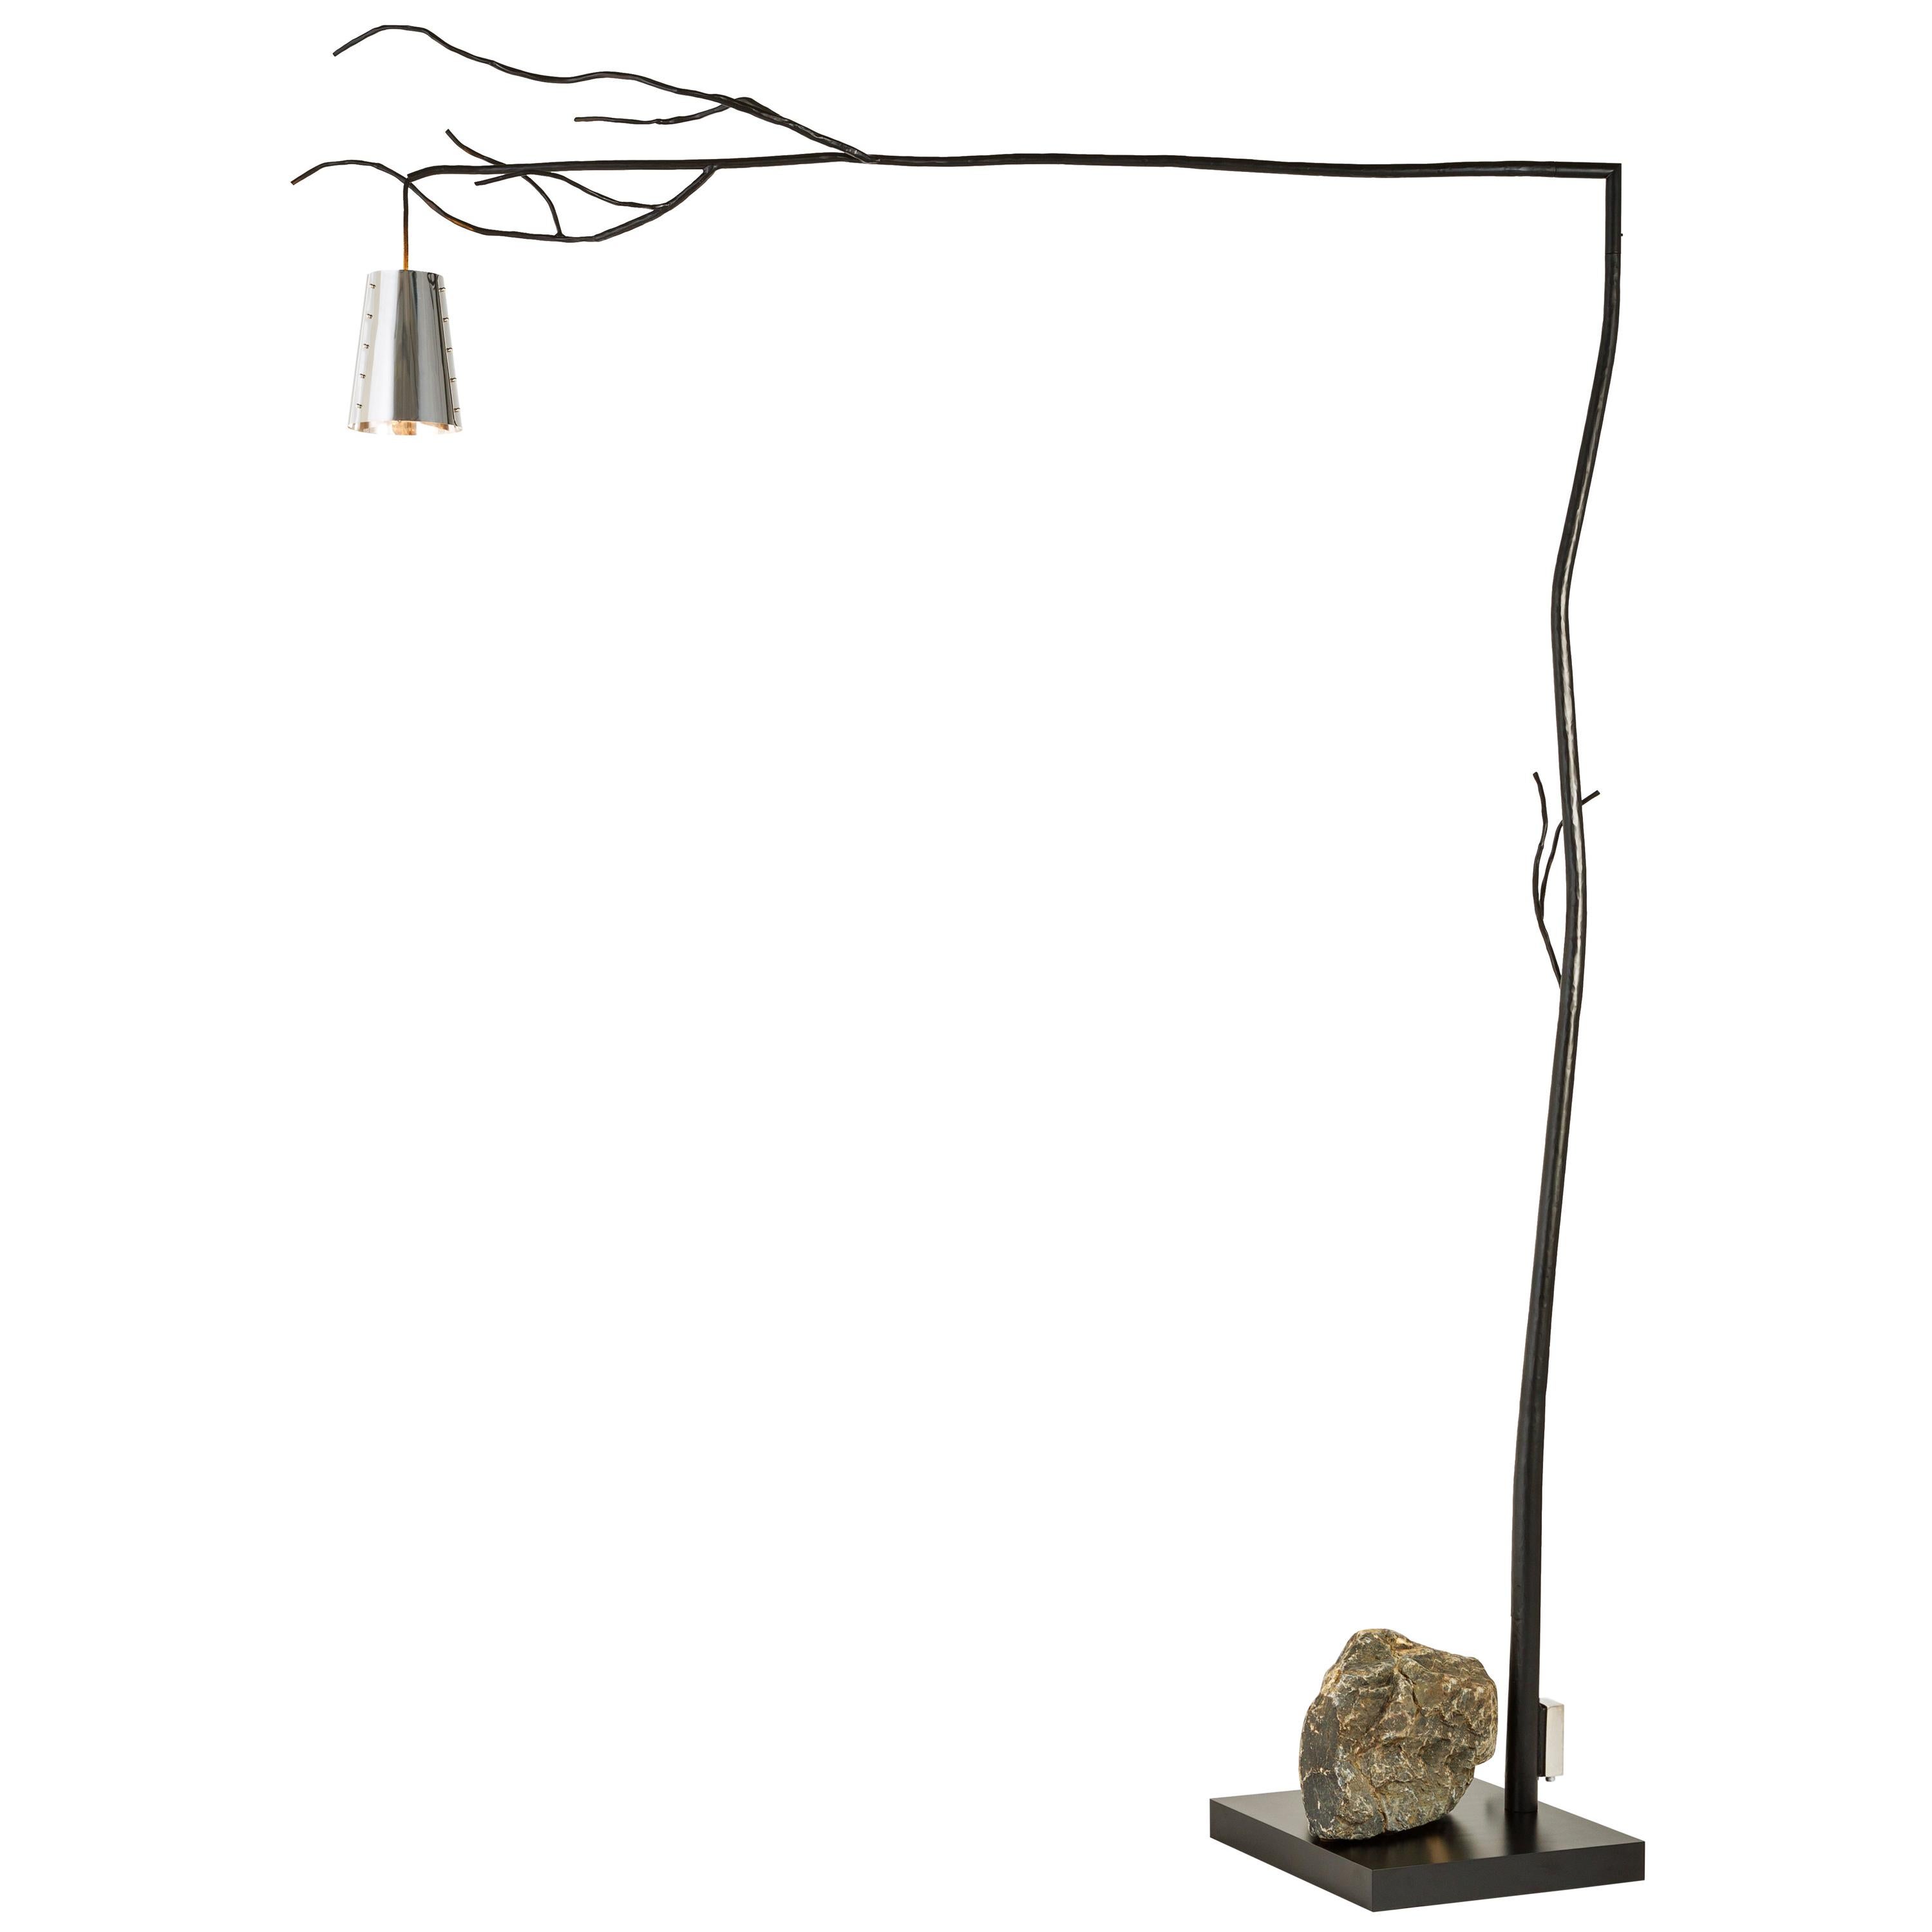 Modern Floor Lamp with a Unique Rock in a Nickel Finish, Flintstone Collection